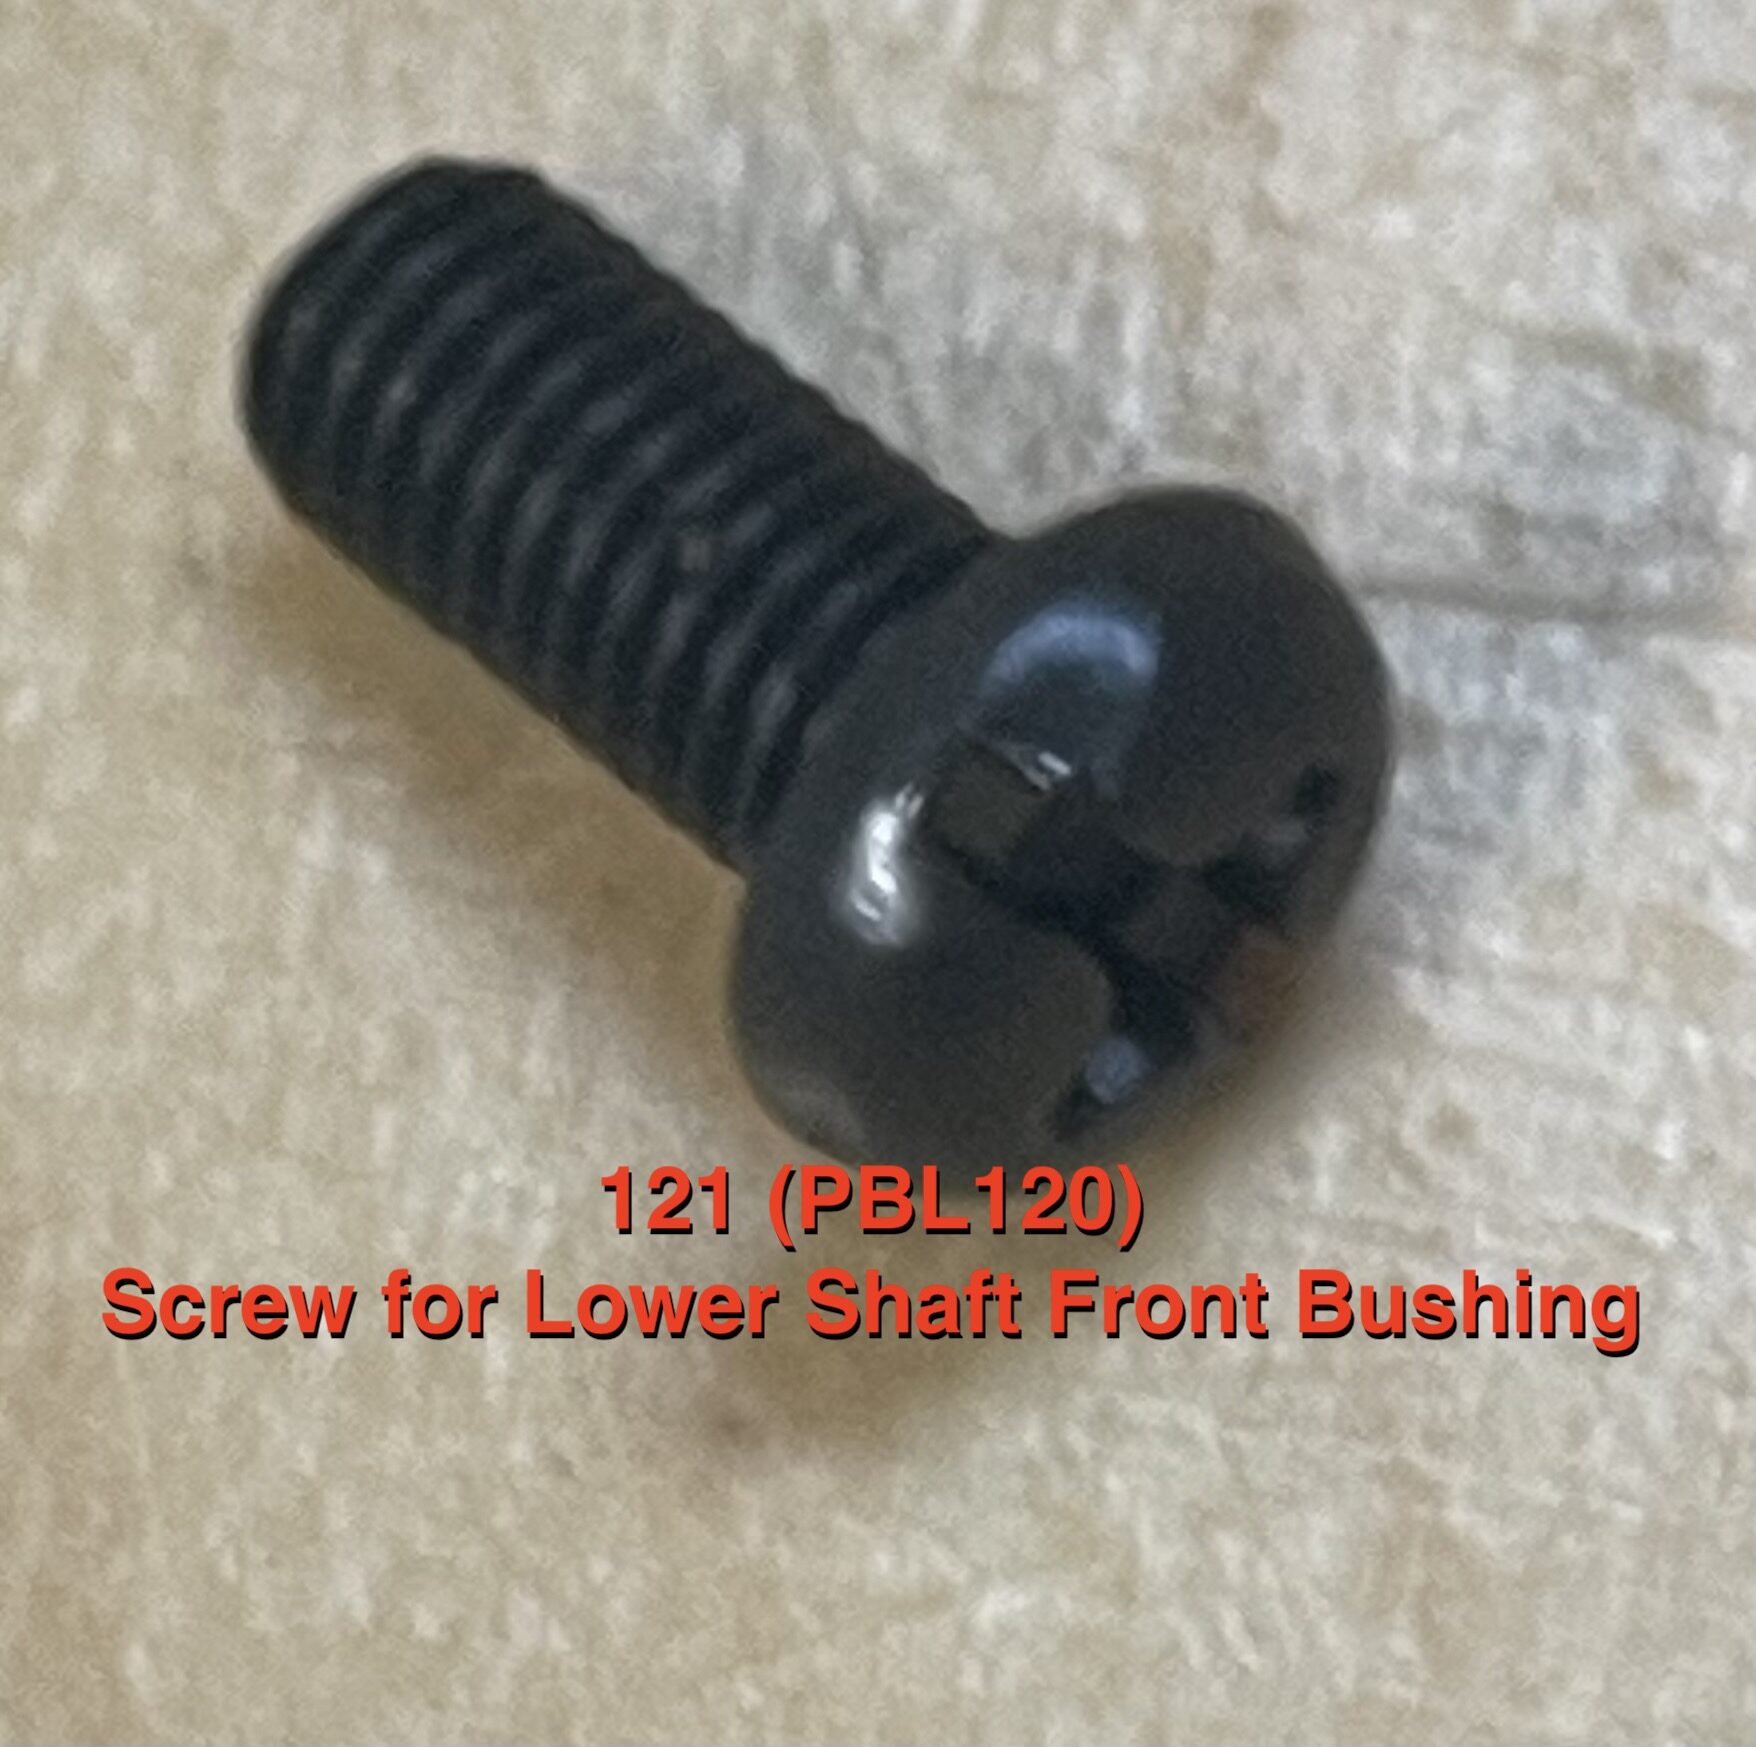 121 (PBL120) Screw for Lower Shaft Front Bushing